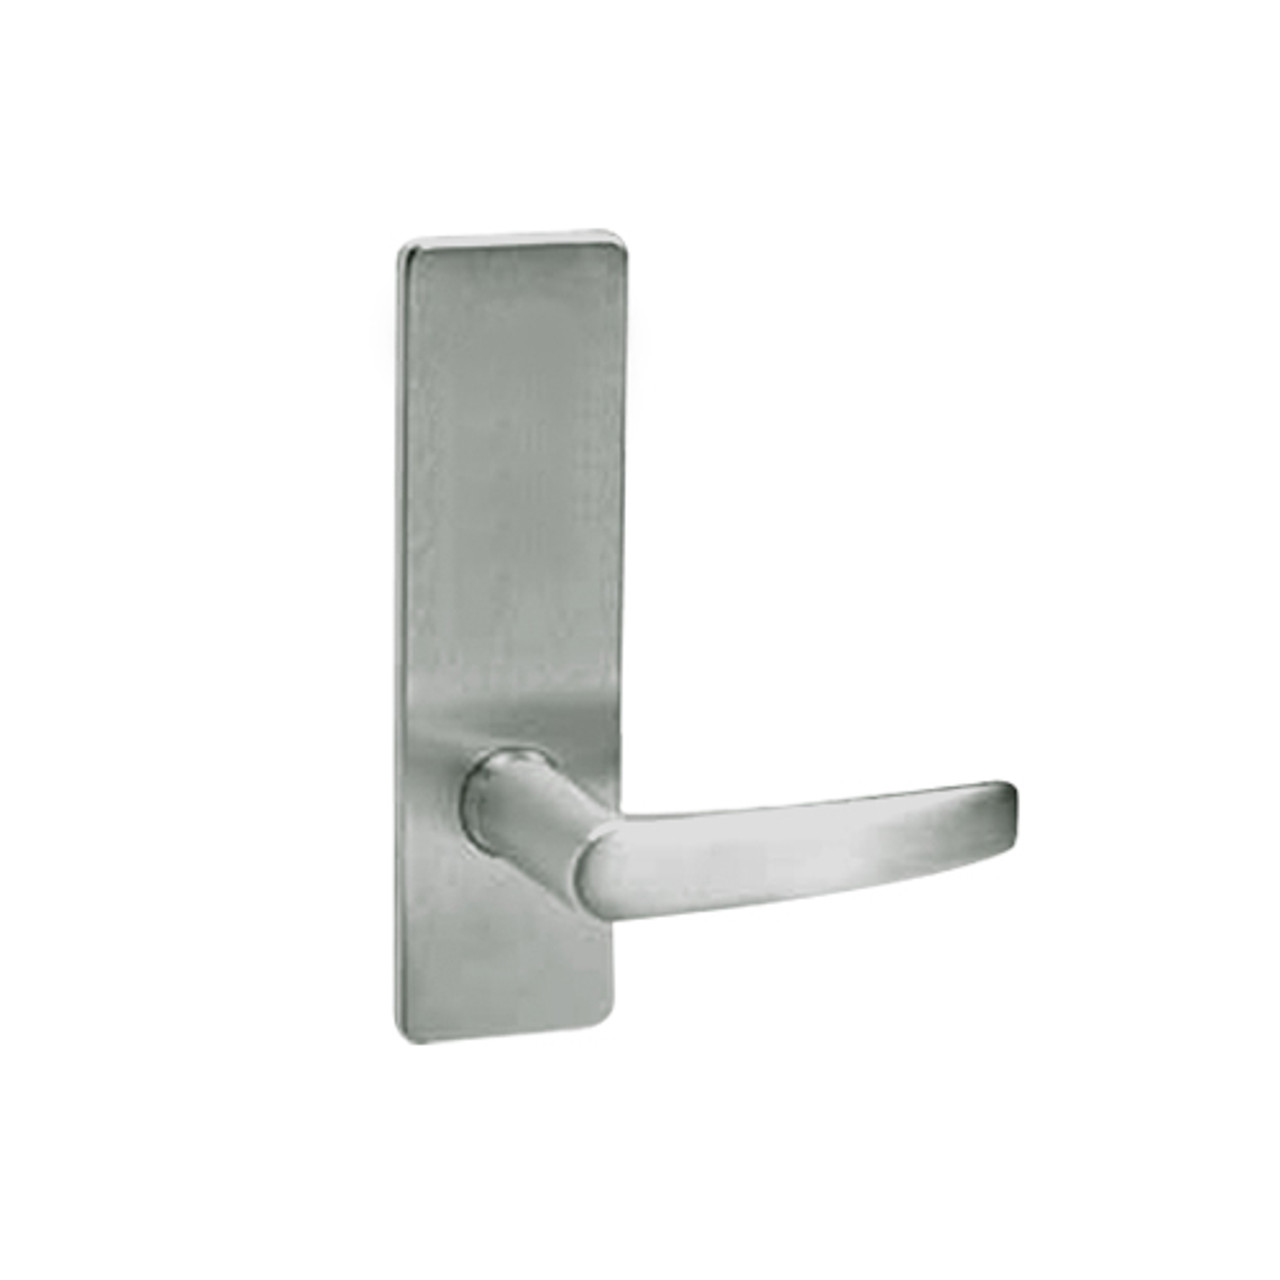 ML2070-ASR-619 Corbin Russwin ML2000 Series Mortise Full Dummy Locksets with Armstrong Lever in Satin Nickel